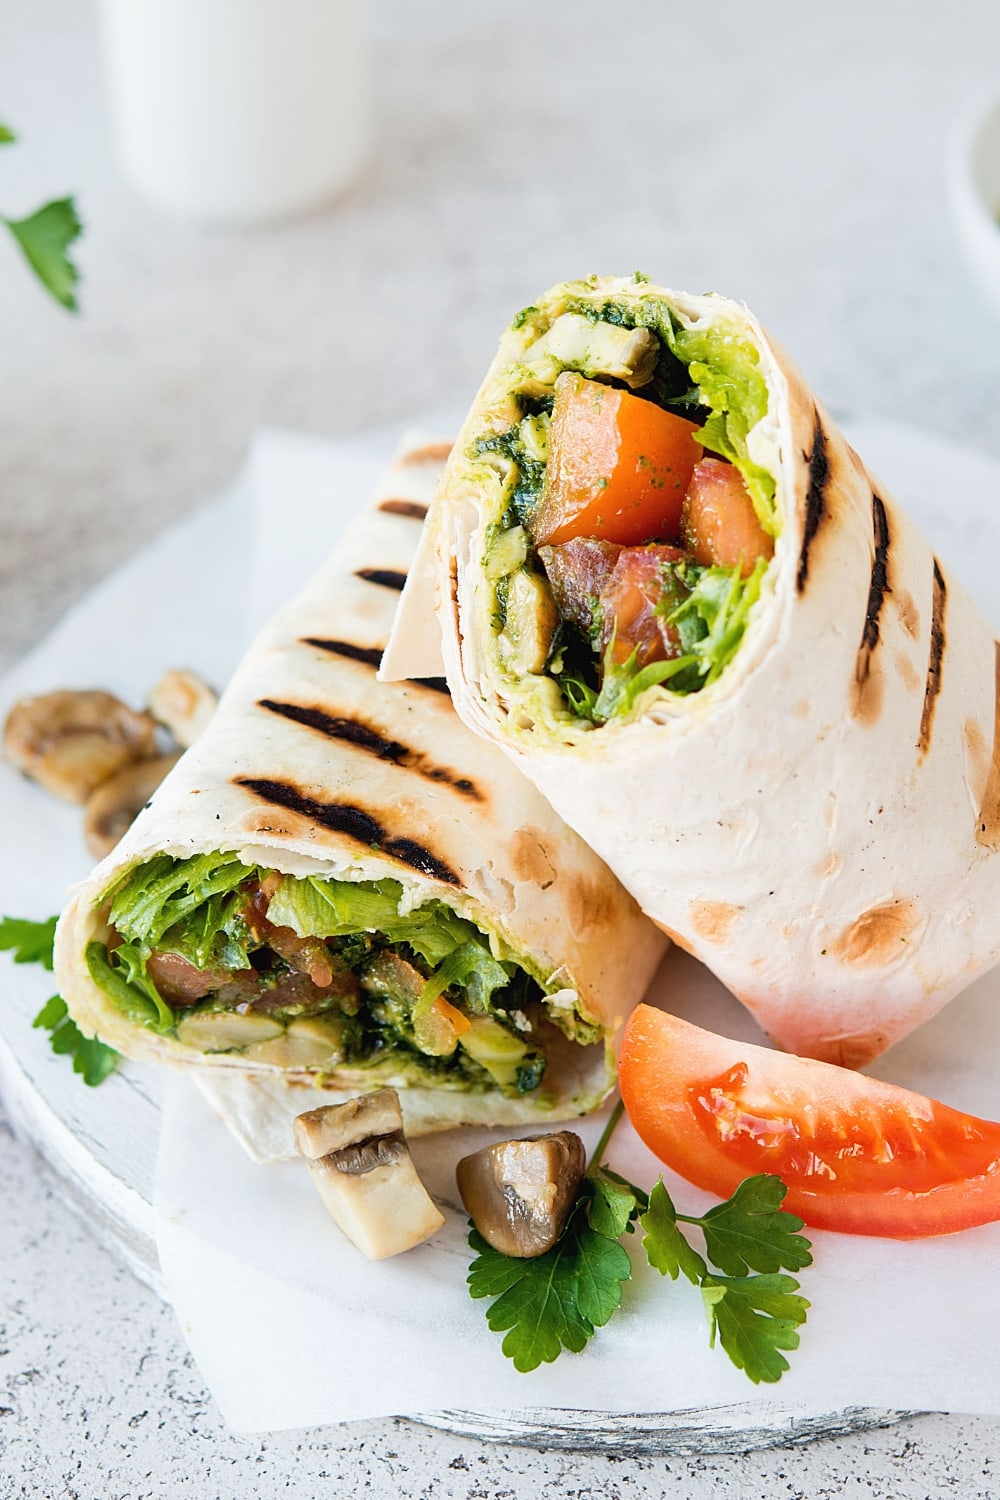 Burritos Wraps Sliced in Half with Mushrooms, Tomatoes, Lettuce and Vegetables Fillings